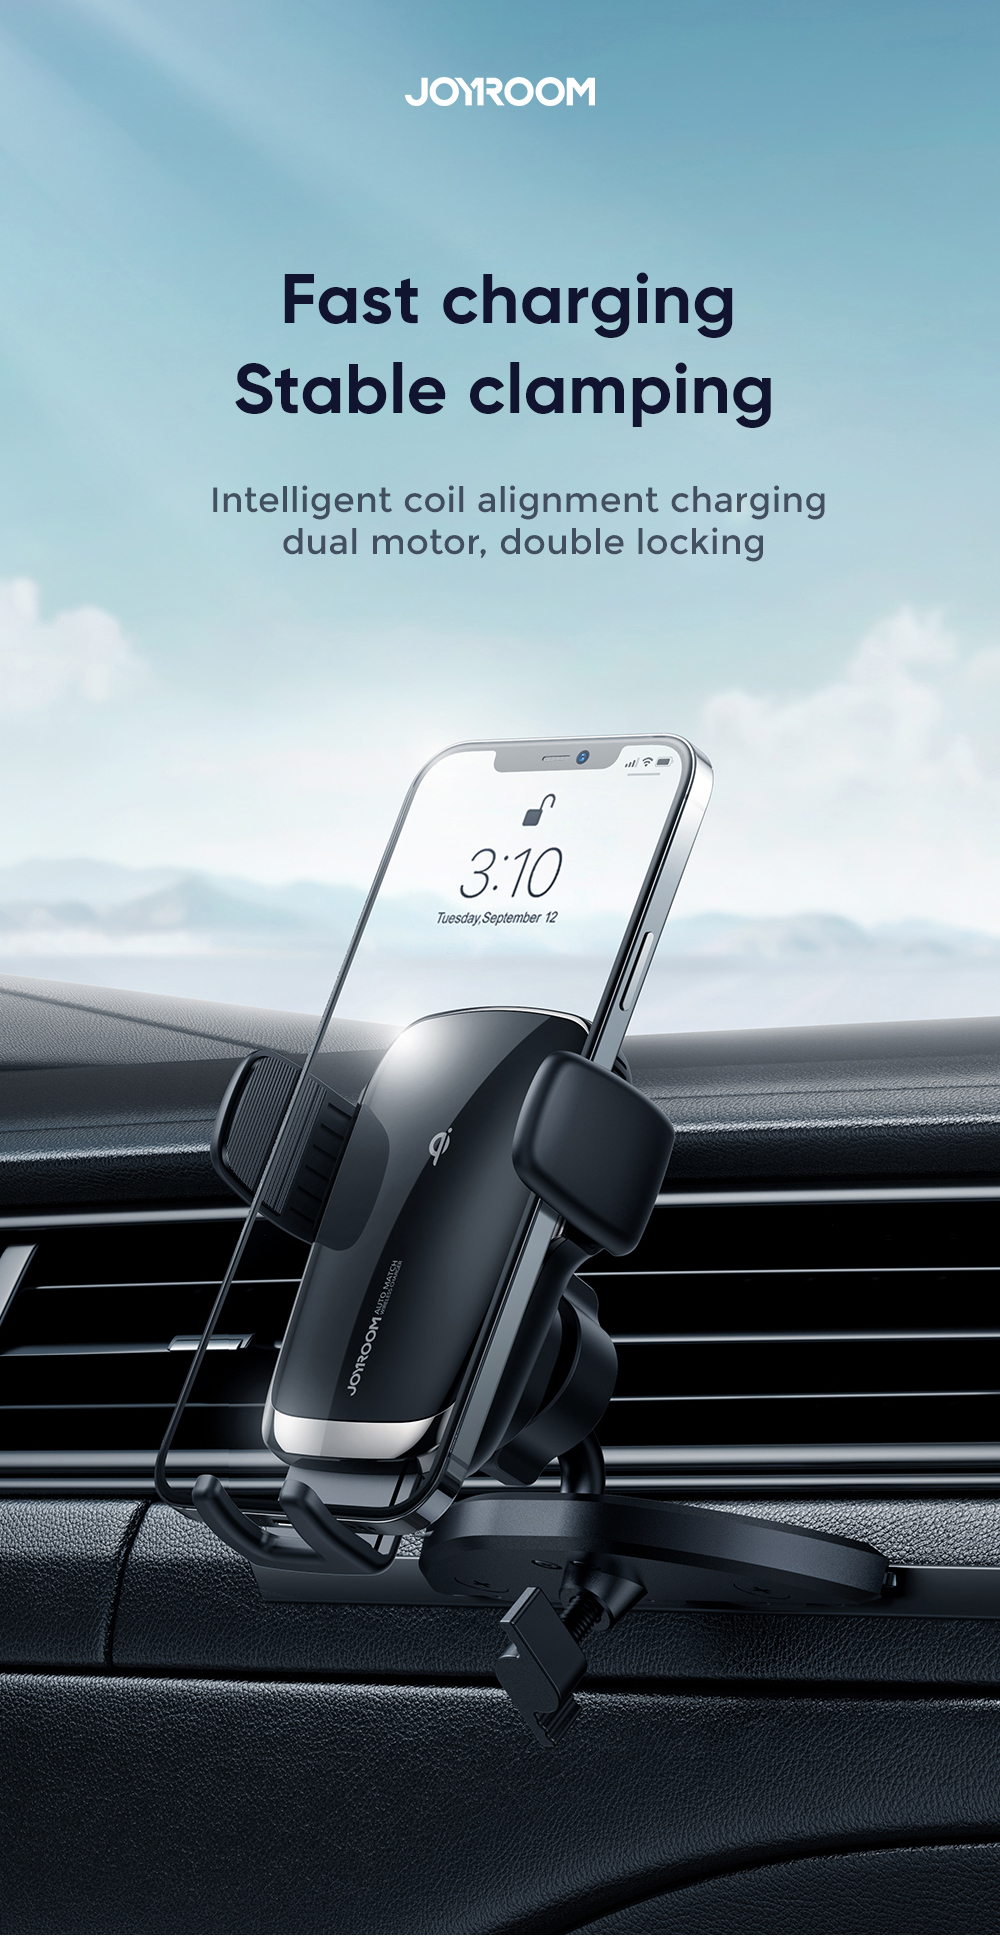 joyroom-JR-ZS248-15W-Qi-Intelligent-Accurate-Alignment-Charging-Car-Mount-for-Air-Vent-Mount--Dashbo-1793581-2